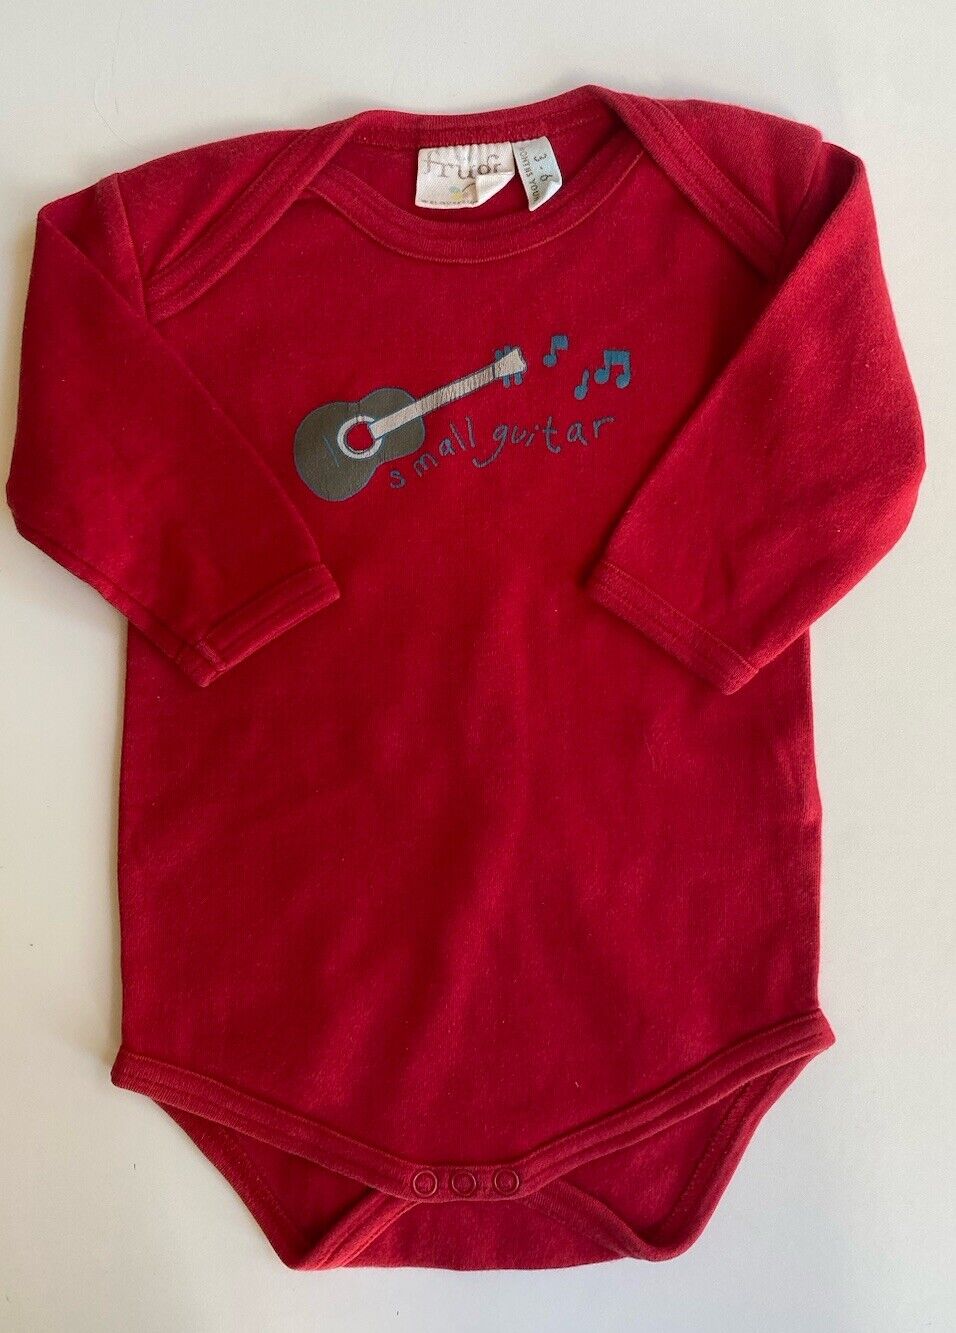 Frugi baby size 3-6 months red long sleeve bodysuit t-shirt top guitar, GUC